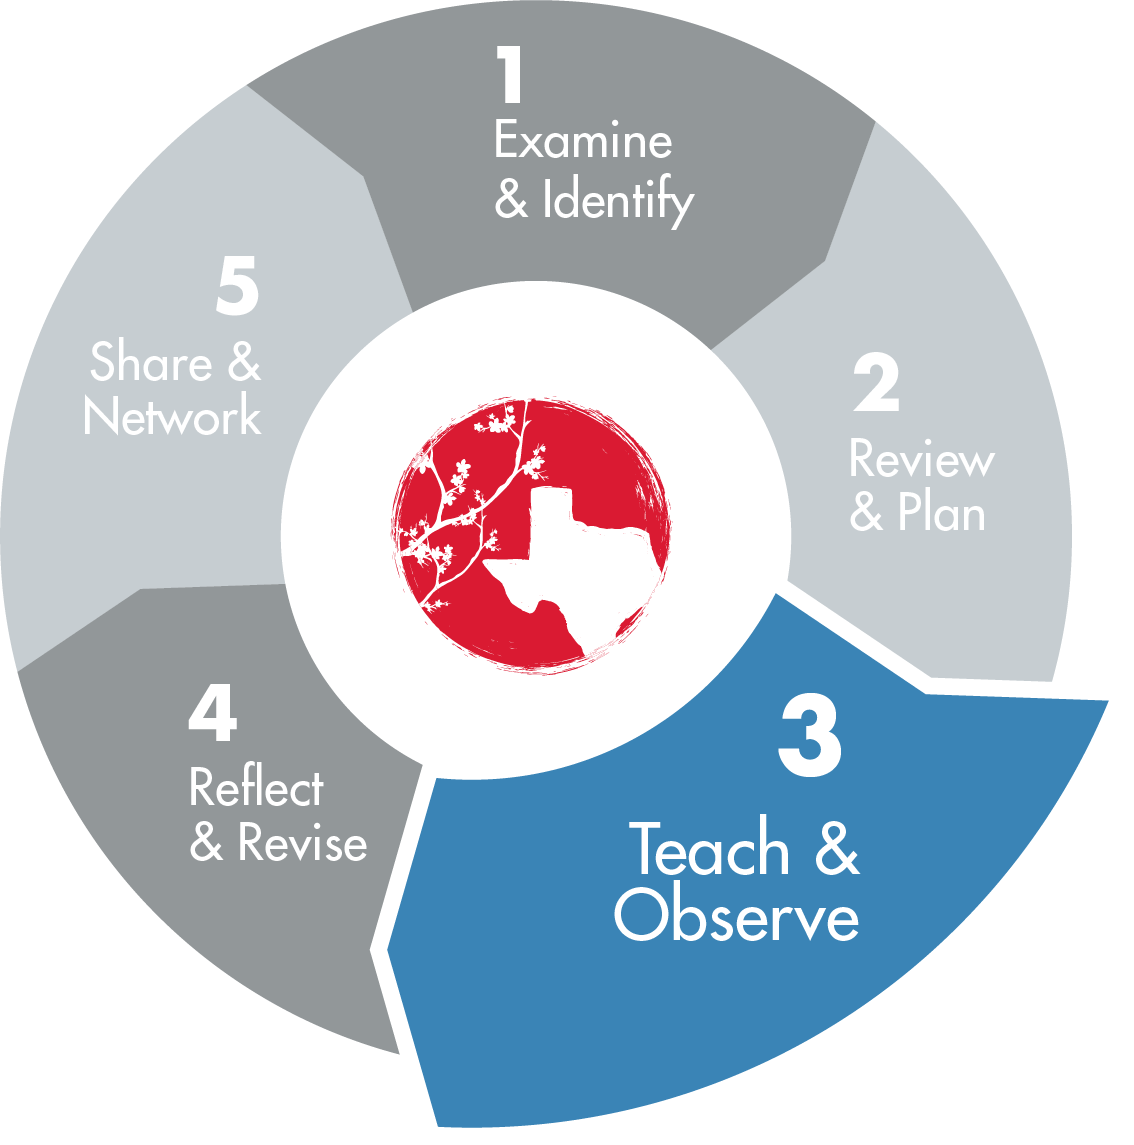 TEXAS LESSON STUDY  5 PHASES - 1. Examine & Identify, 2. Review & Plan, 3. Teach & Observe, 4. Reflect & Revise and 5. Share & Network,  where phase 3 is visually selected